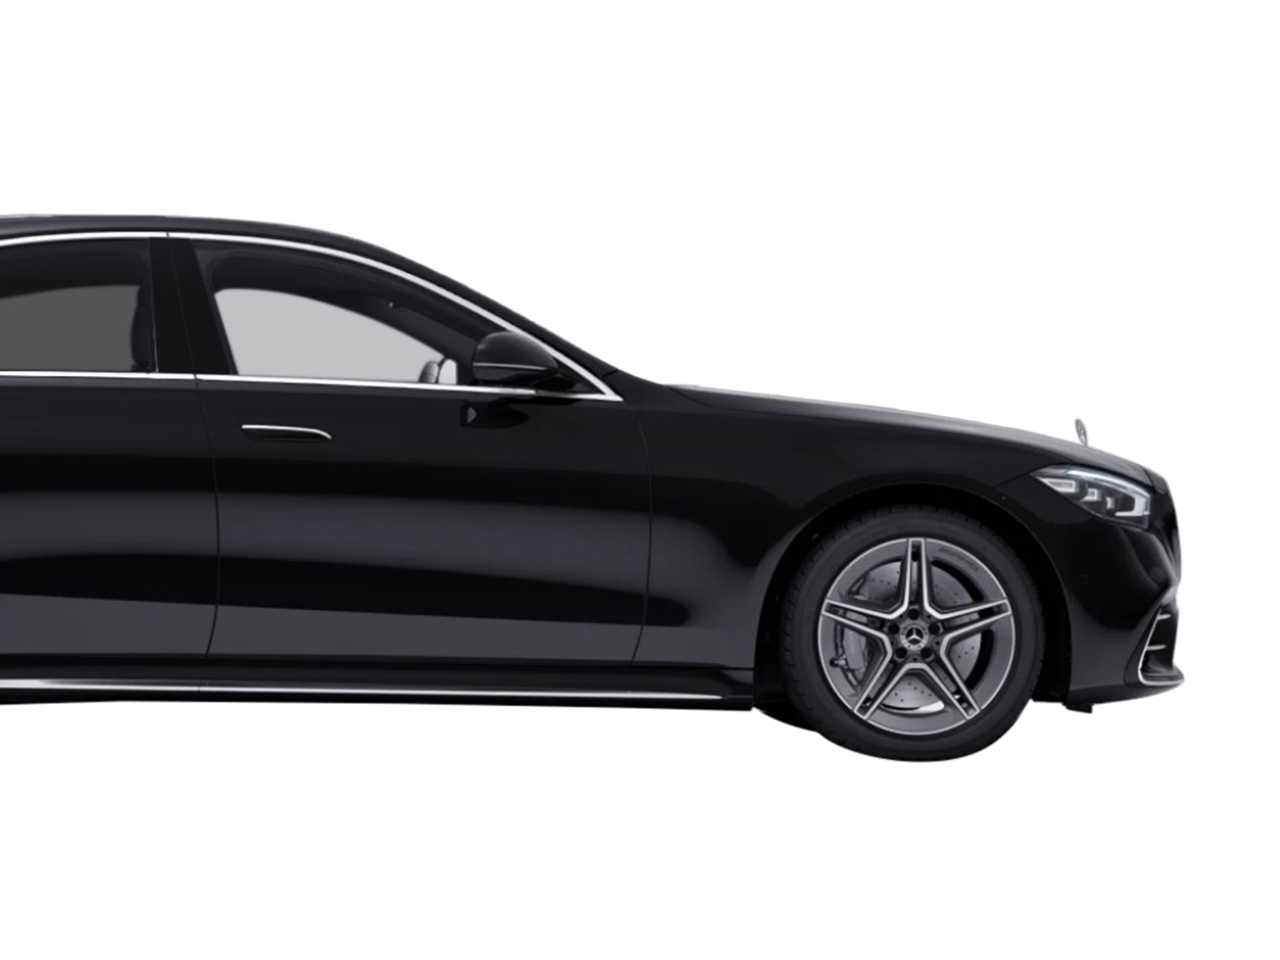 Mercedes S500 4 Matic LWB car for hire